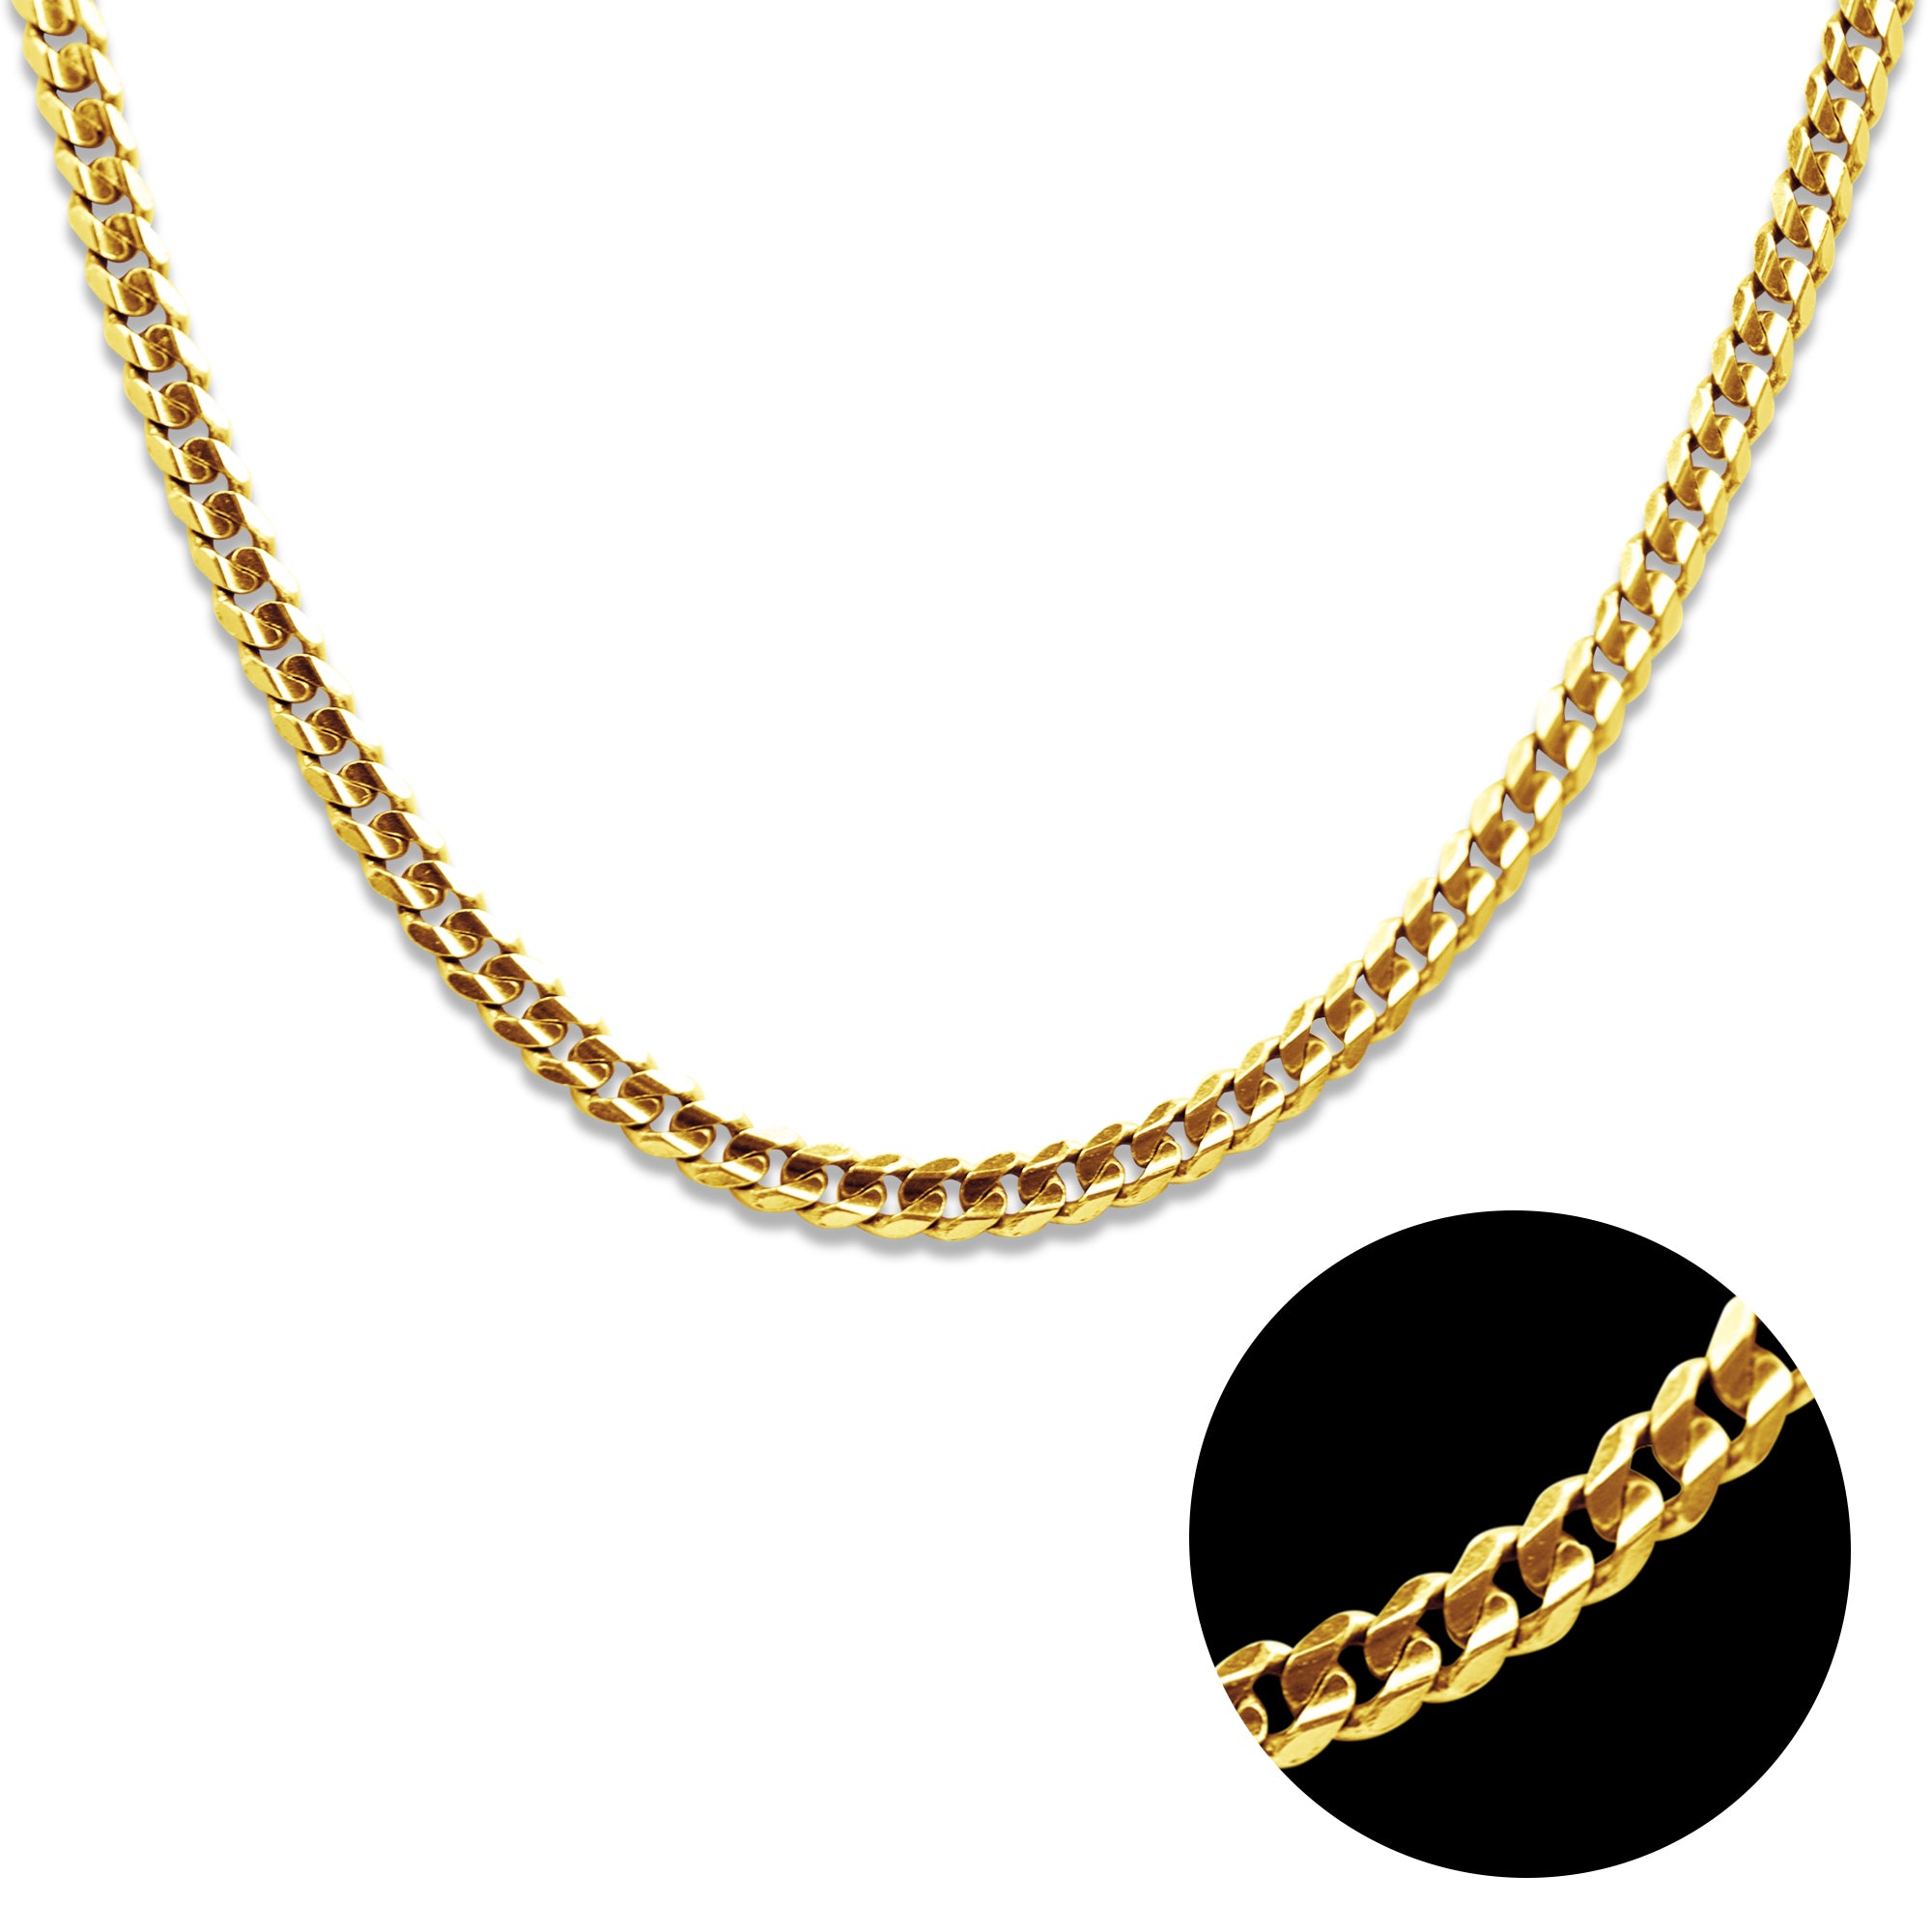 BARB CHAIN IN 18K YELLOW GOLD (22